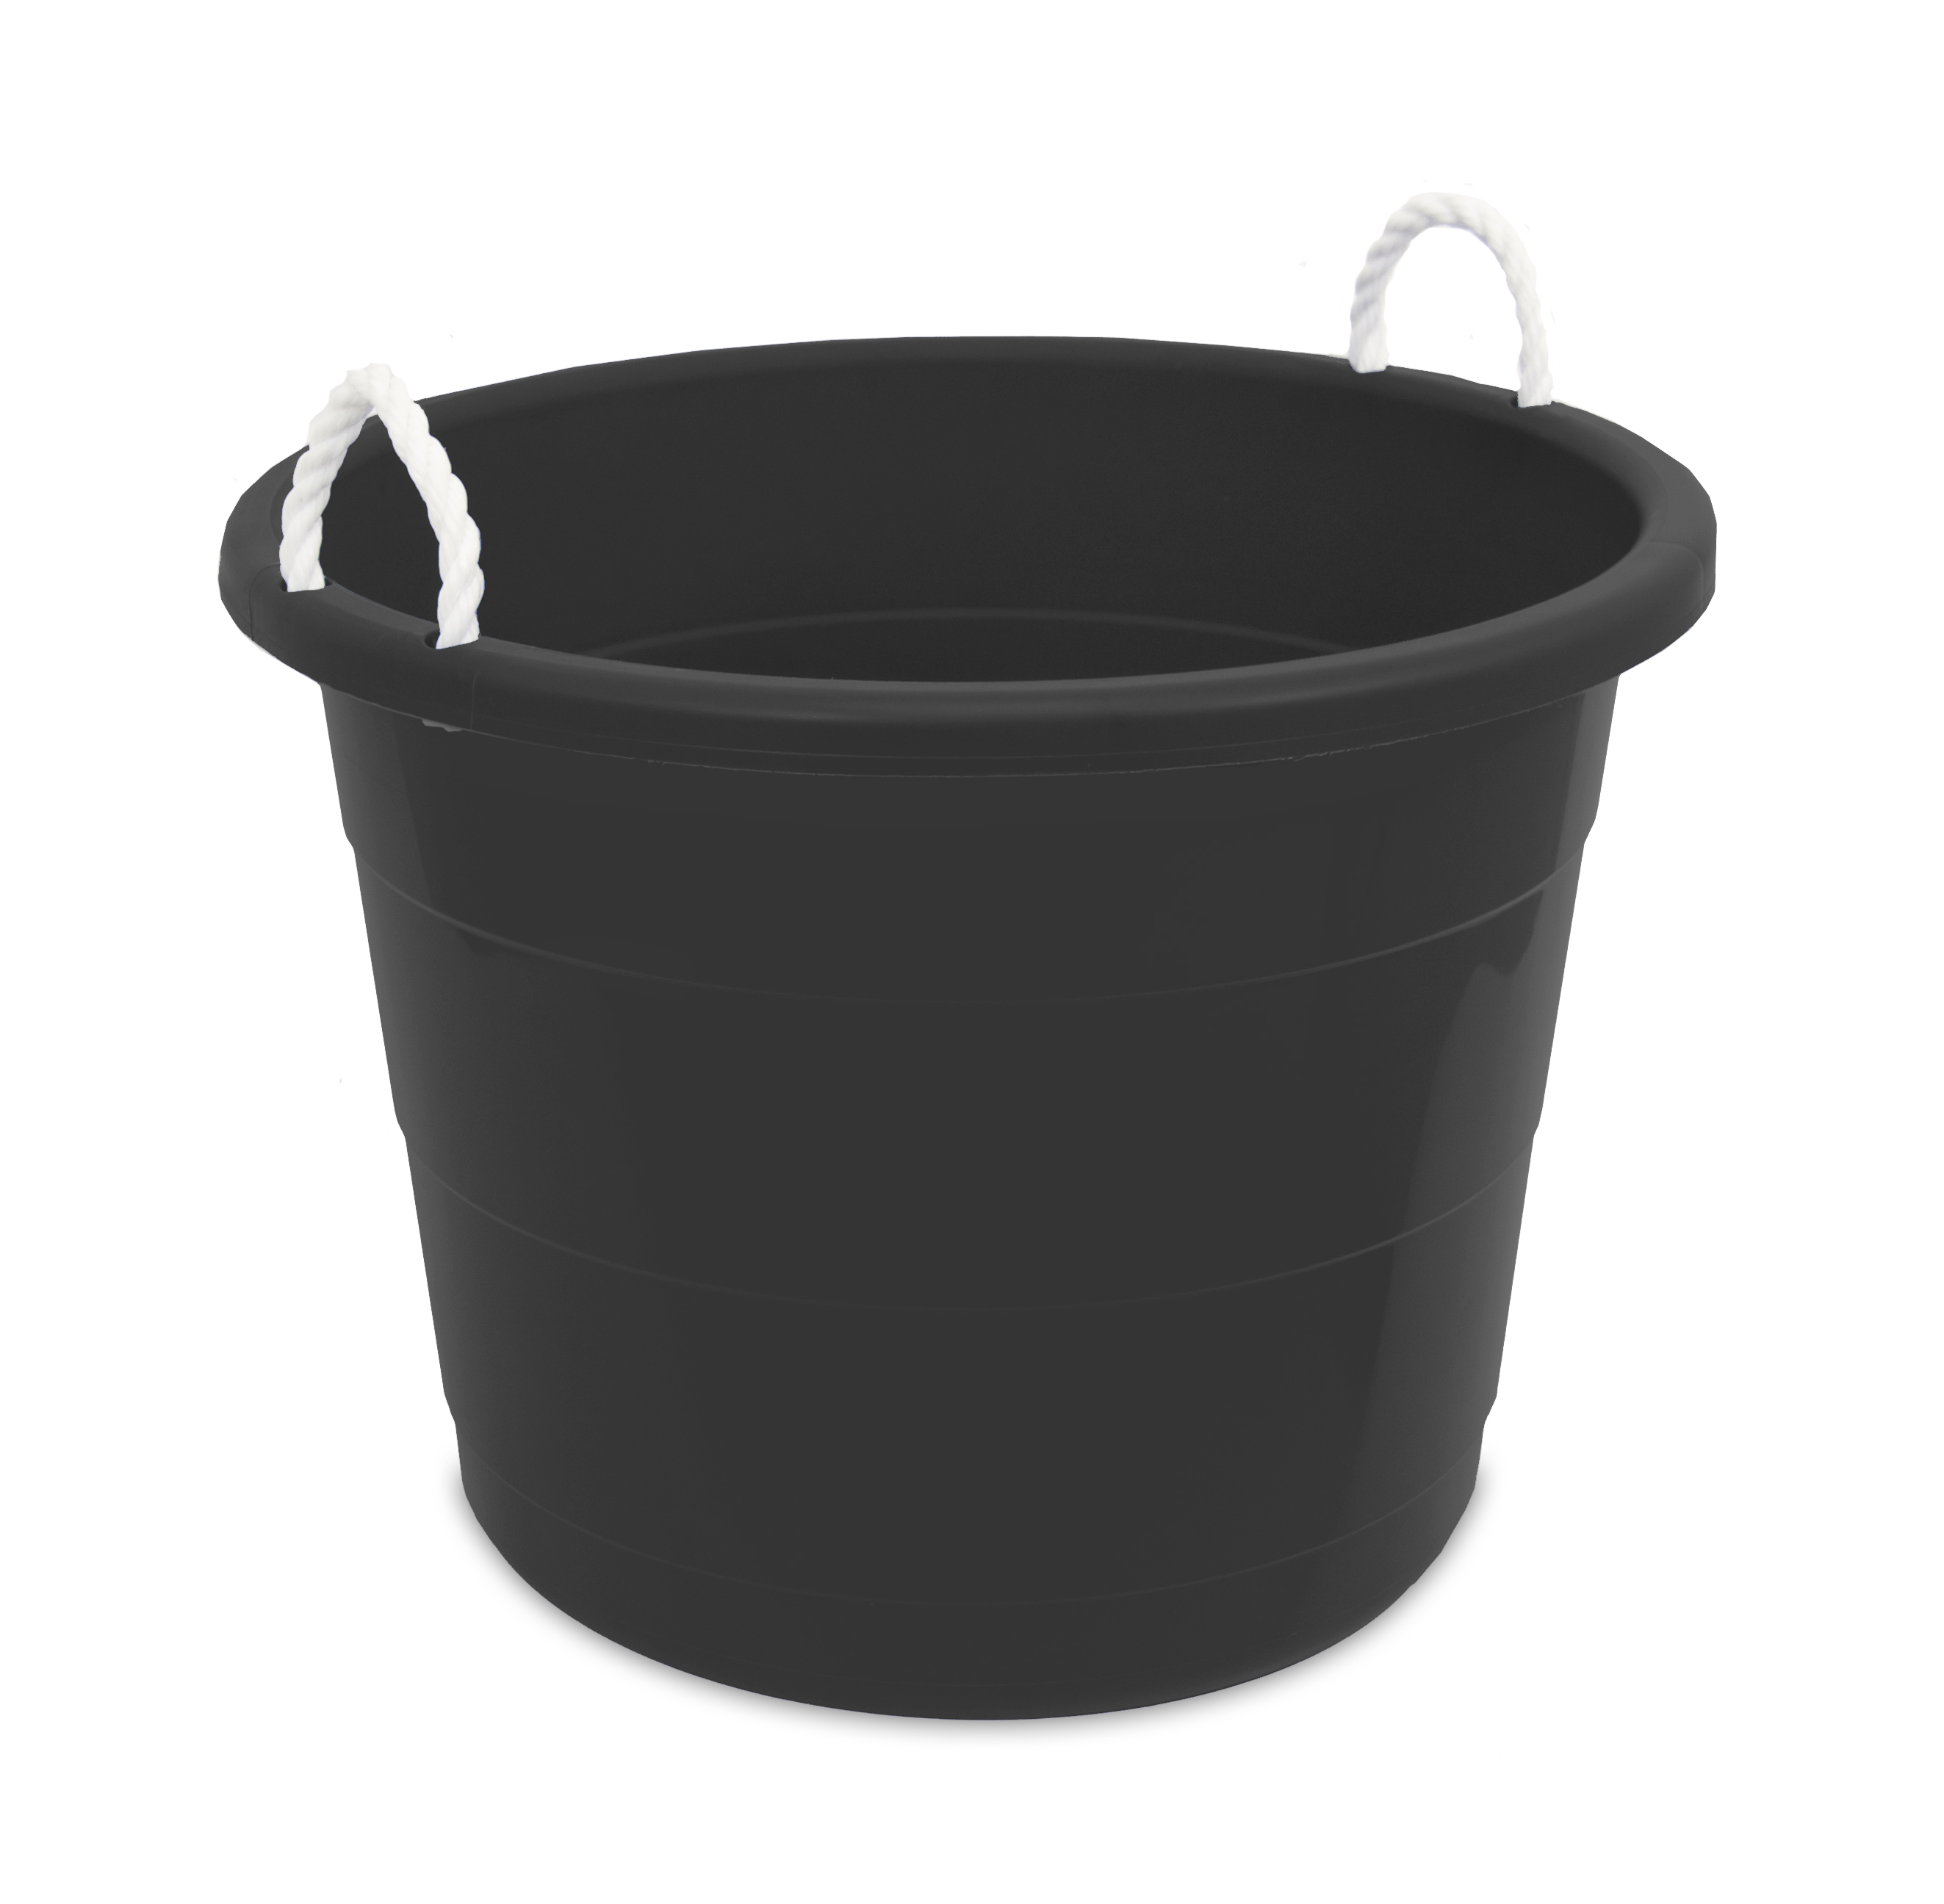 Mainstays 17-Gallon Plastic Utility Tub with Rope Handles, Black, Set of 2 - image 4 of 4